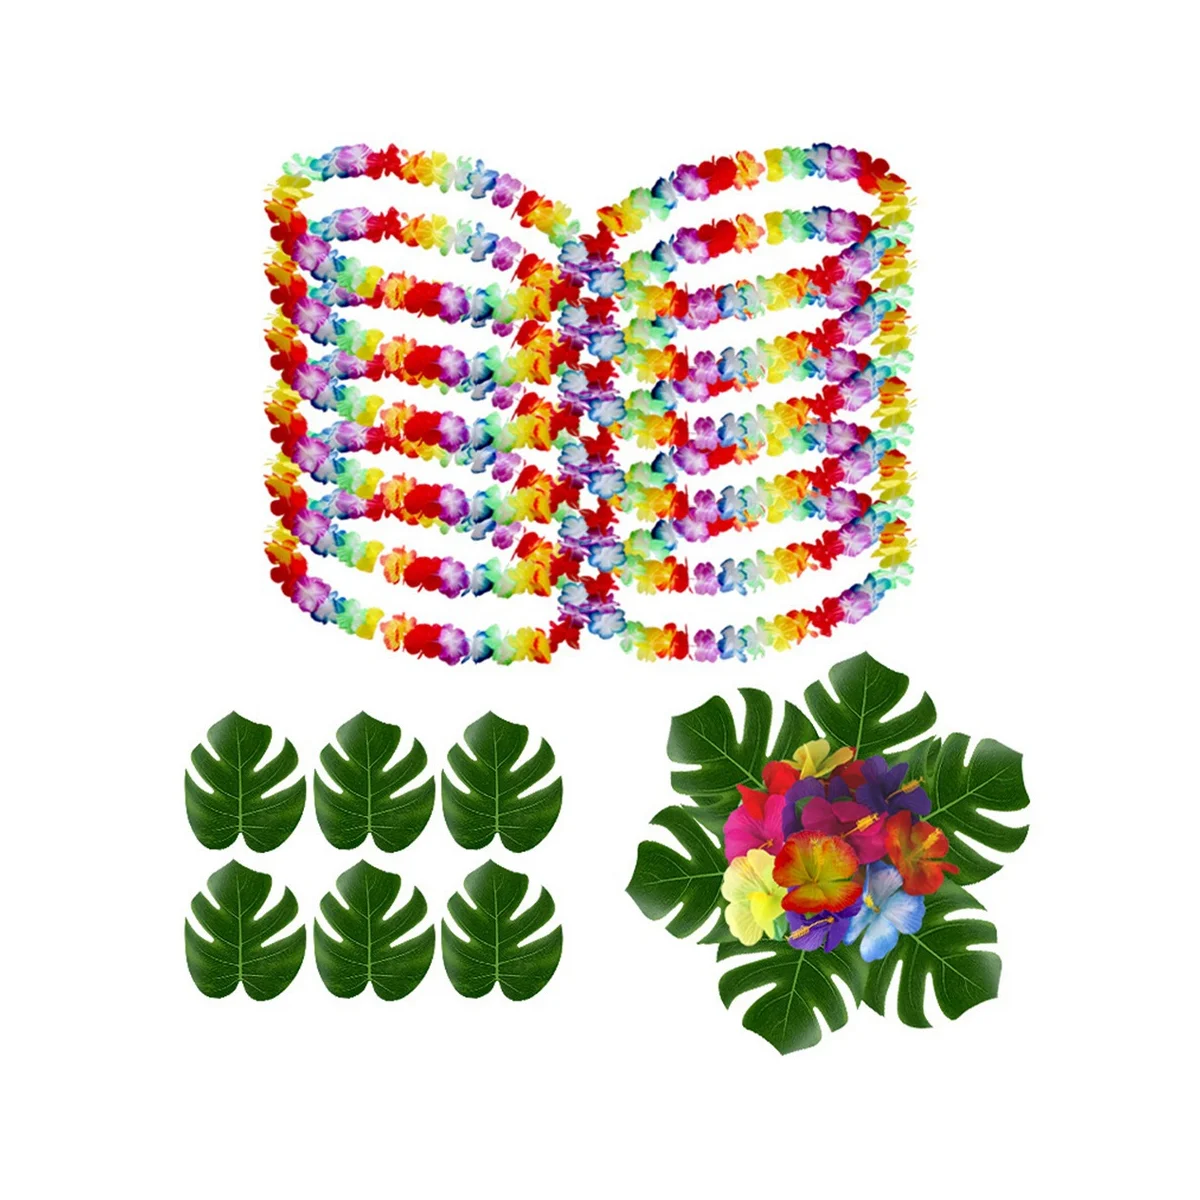 

48 Pcs Hawaiian Garlands Leis Necklaces Artificial Palm Leaves for Hawaii Fancy Dress Tropical Luau Decorations Supplies